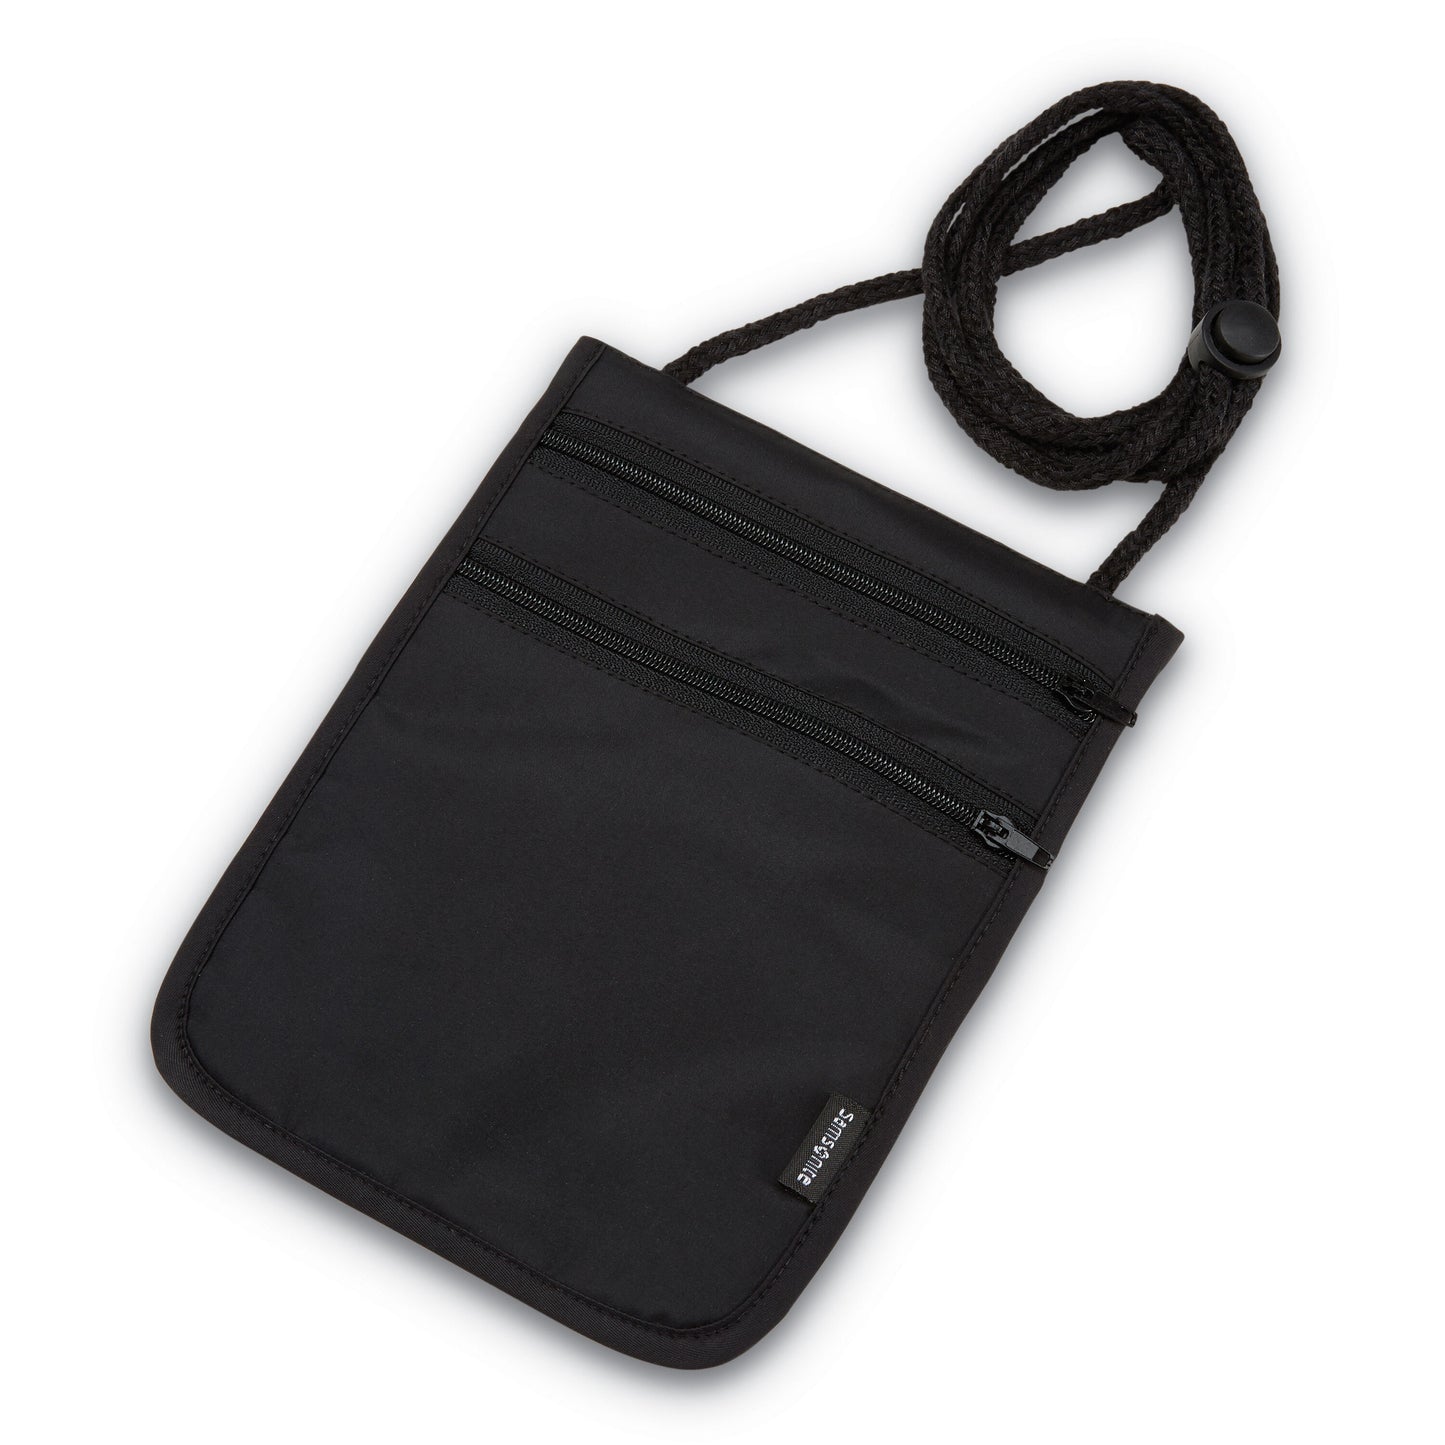 Samsonite - RFID Travel Neck Pouch(Antimicrobial)